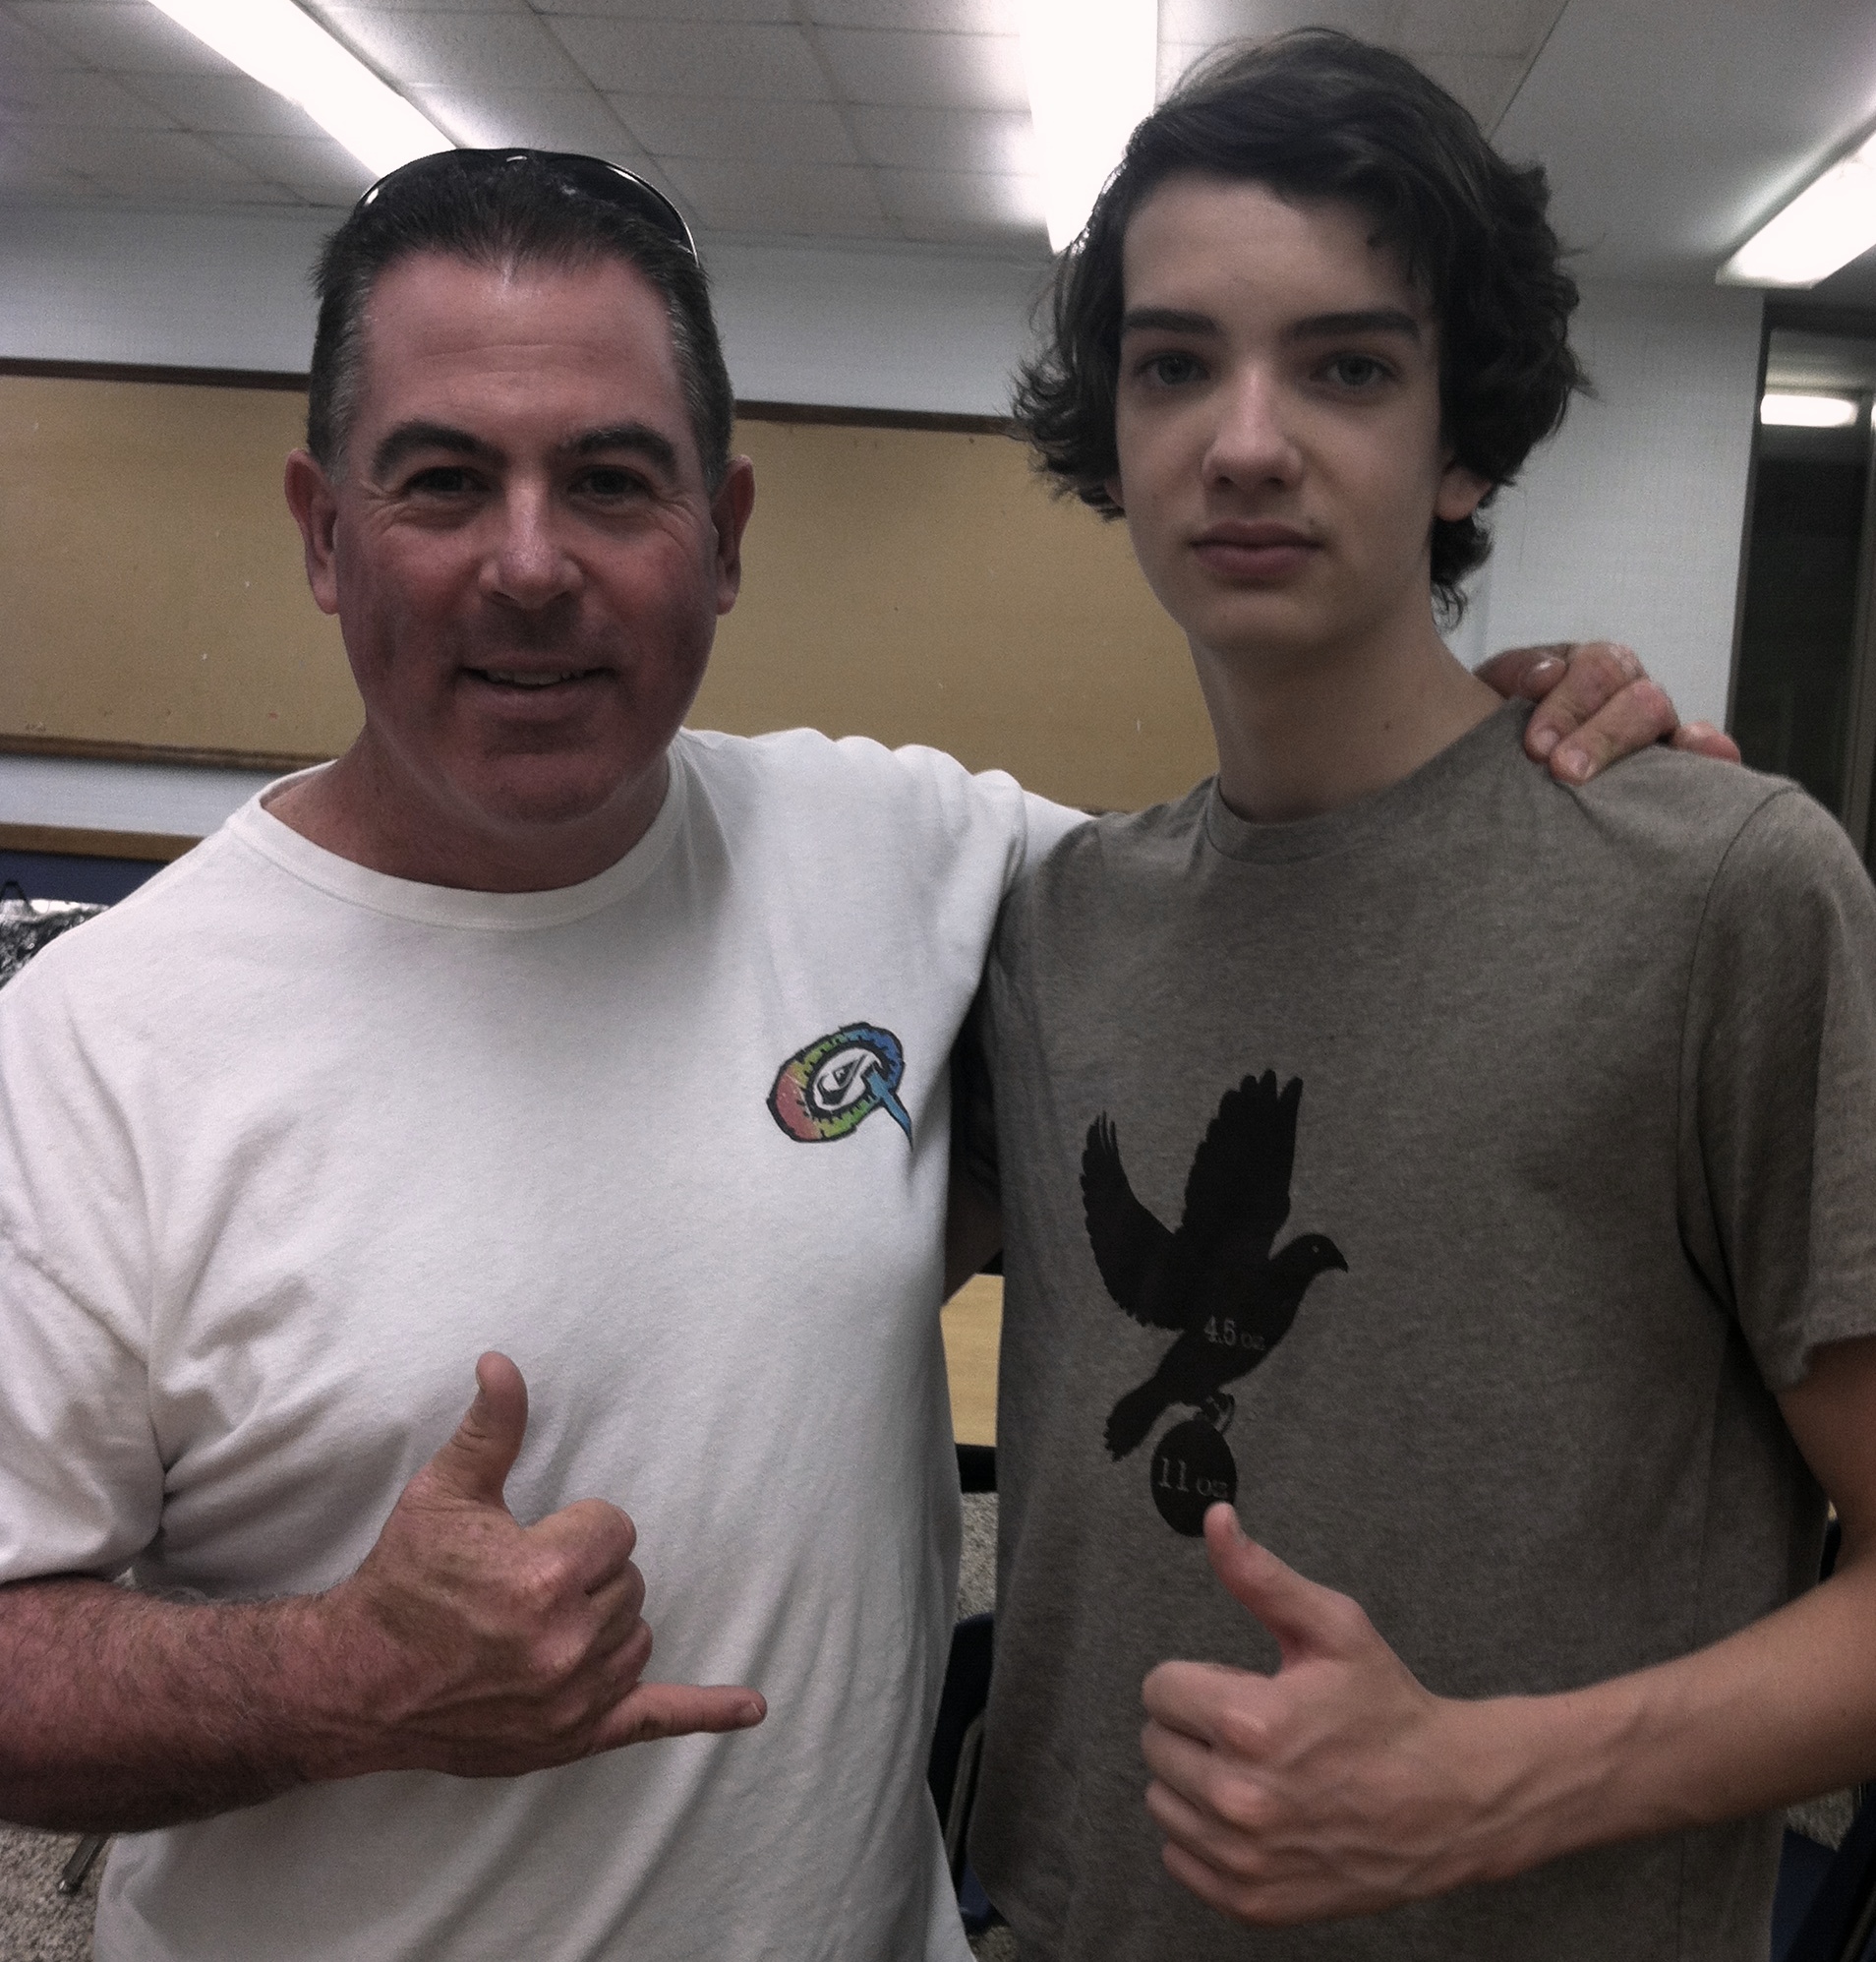 Michael W Gray with young star Kodi Smit-McPhee on set of A BIRDERS GUIDE TO EVERYTHING 2012